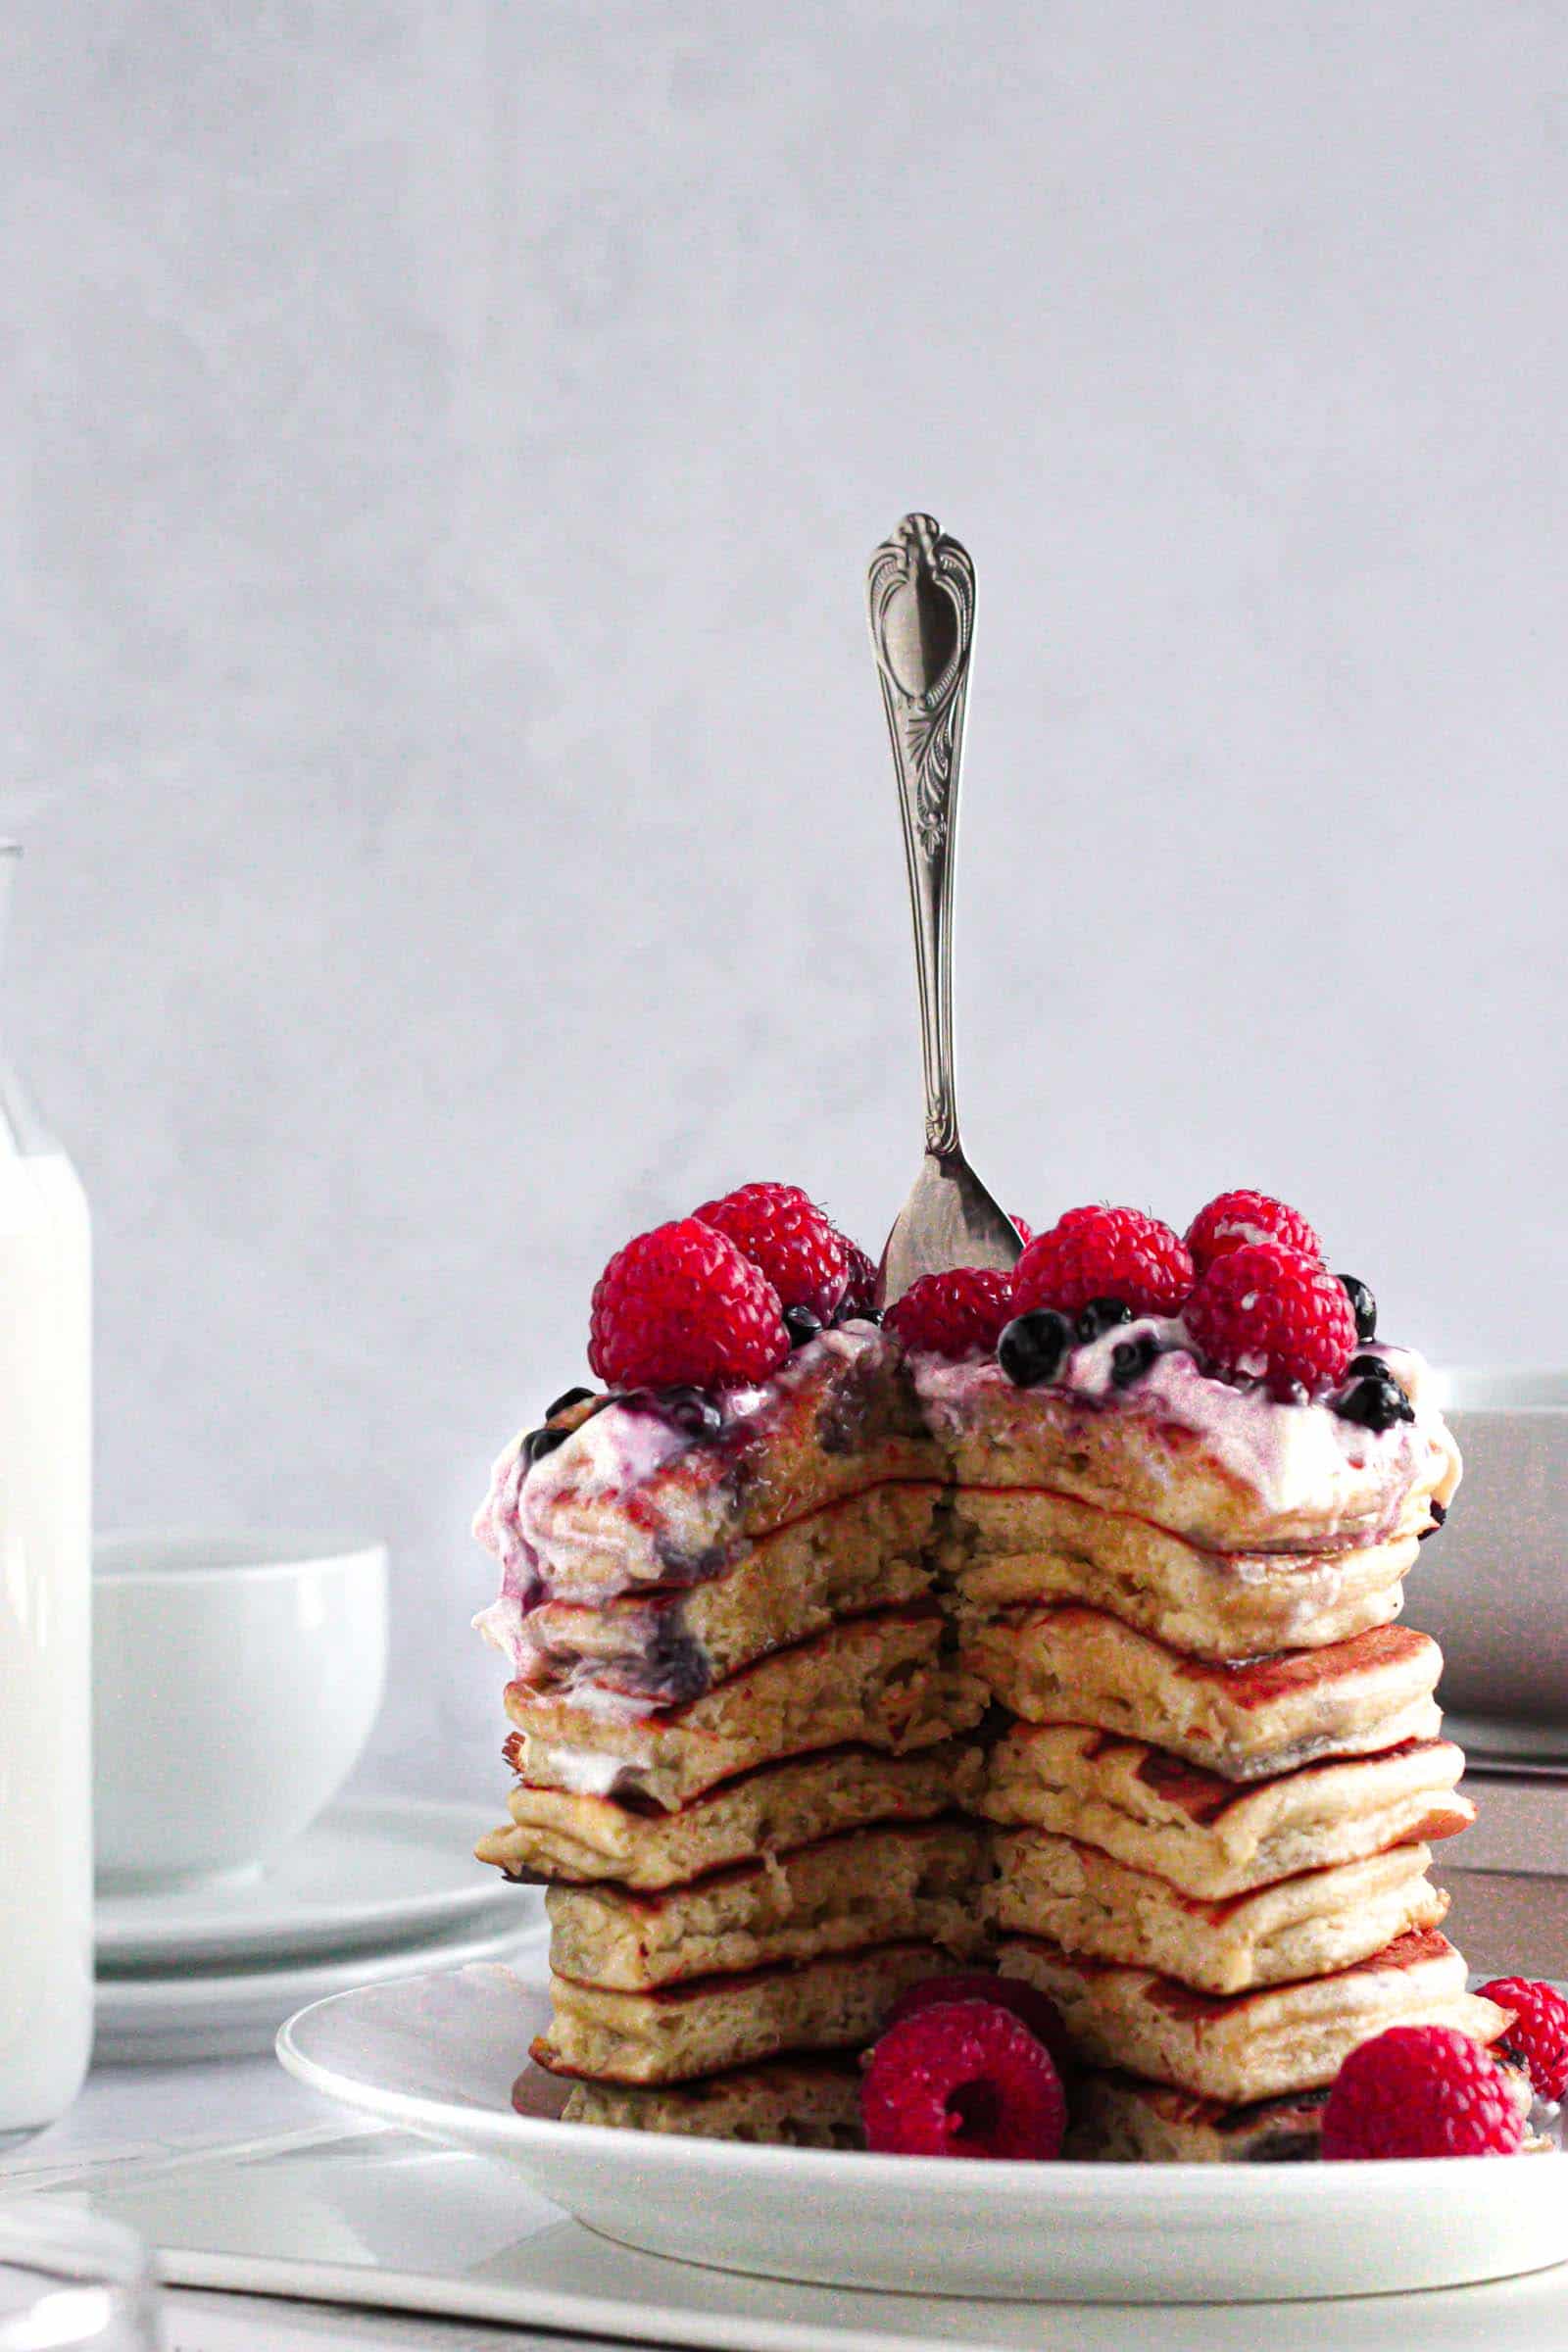 Pancakes thick and fluffy topped with fruits, yogurt and maple syrup